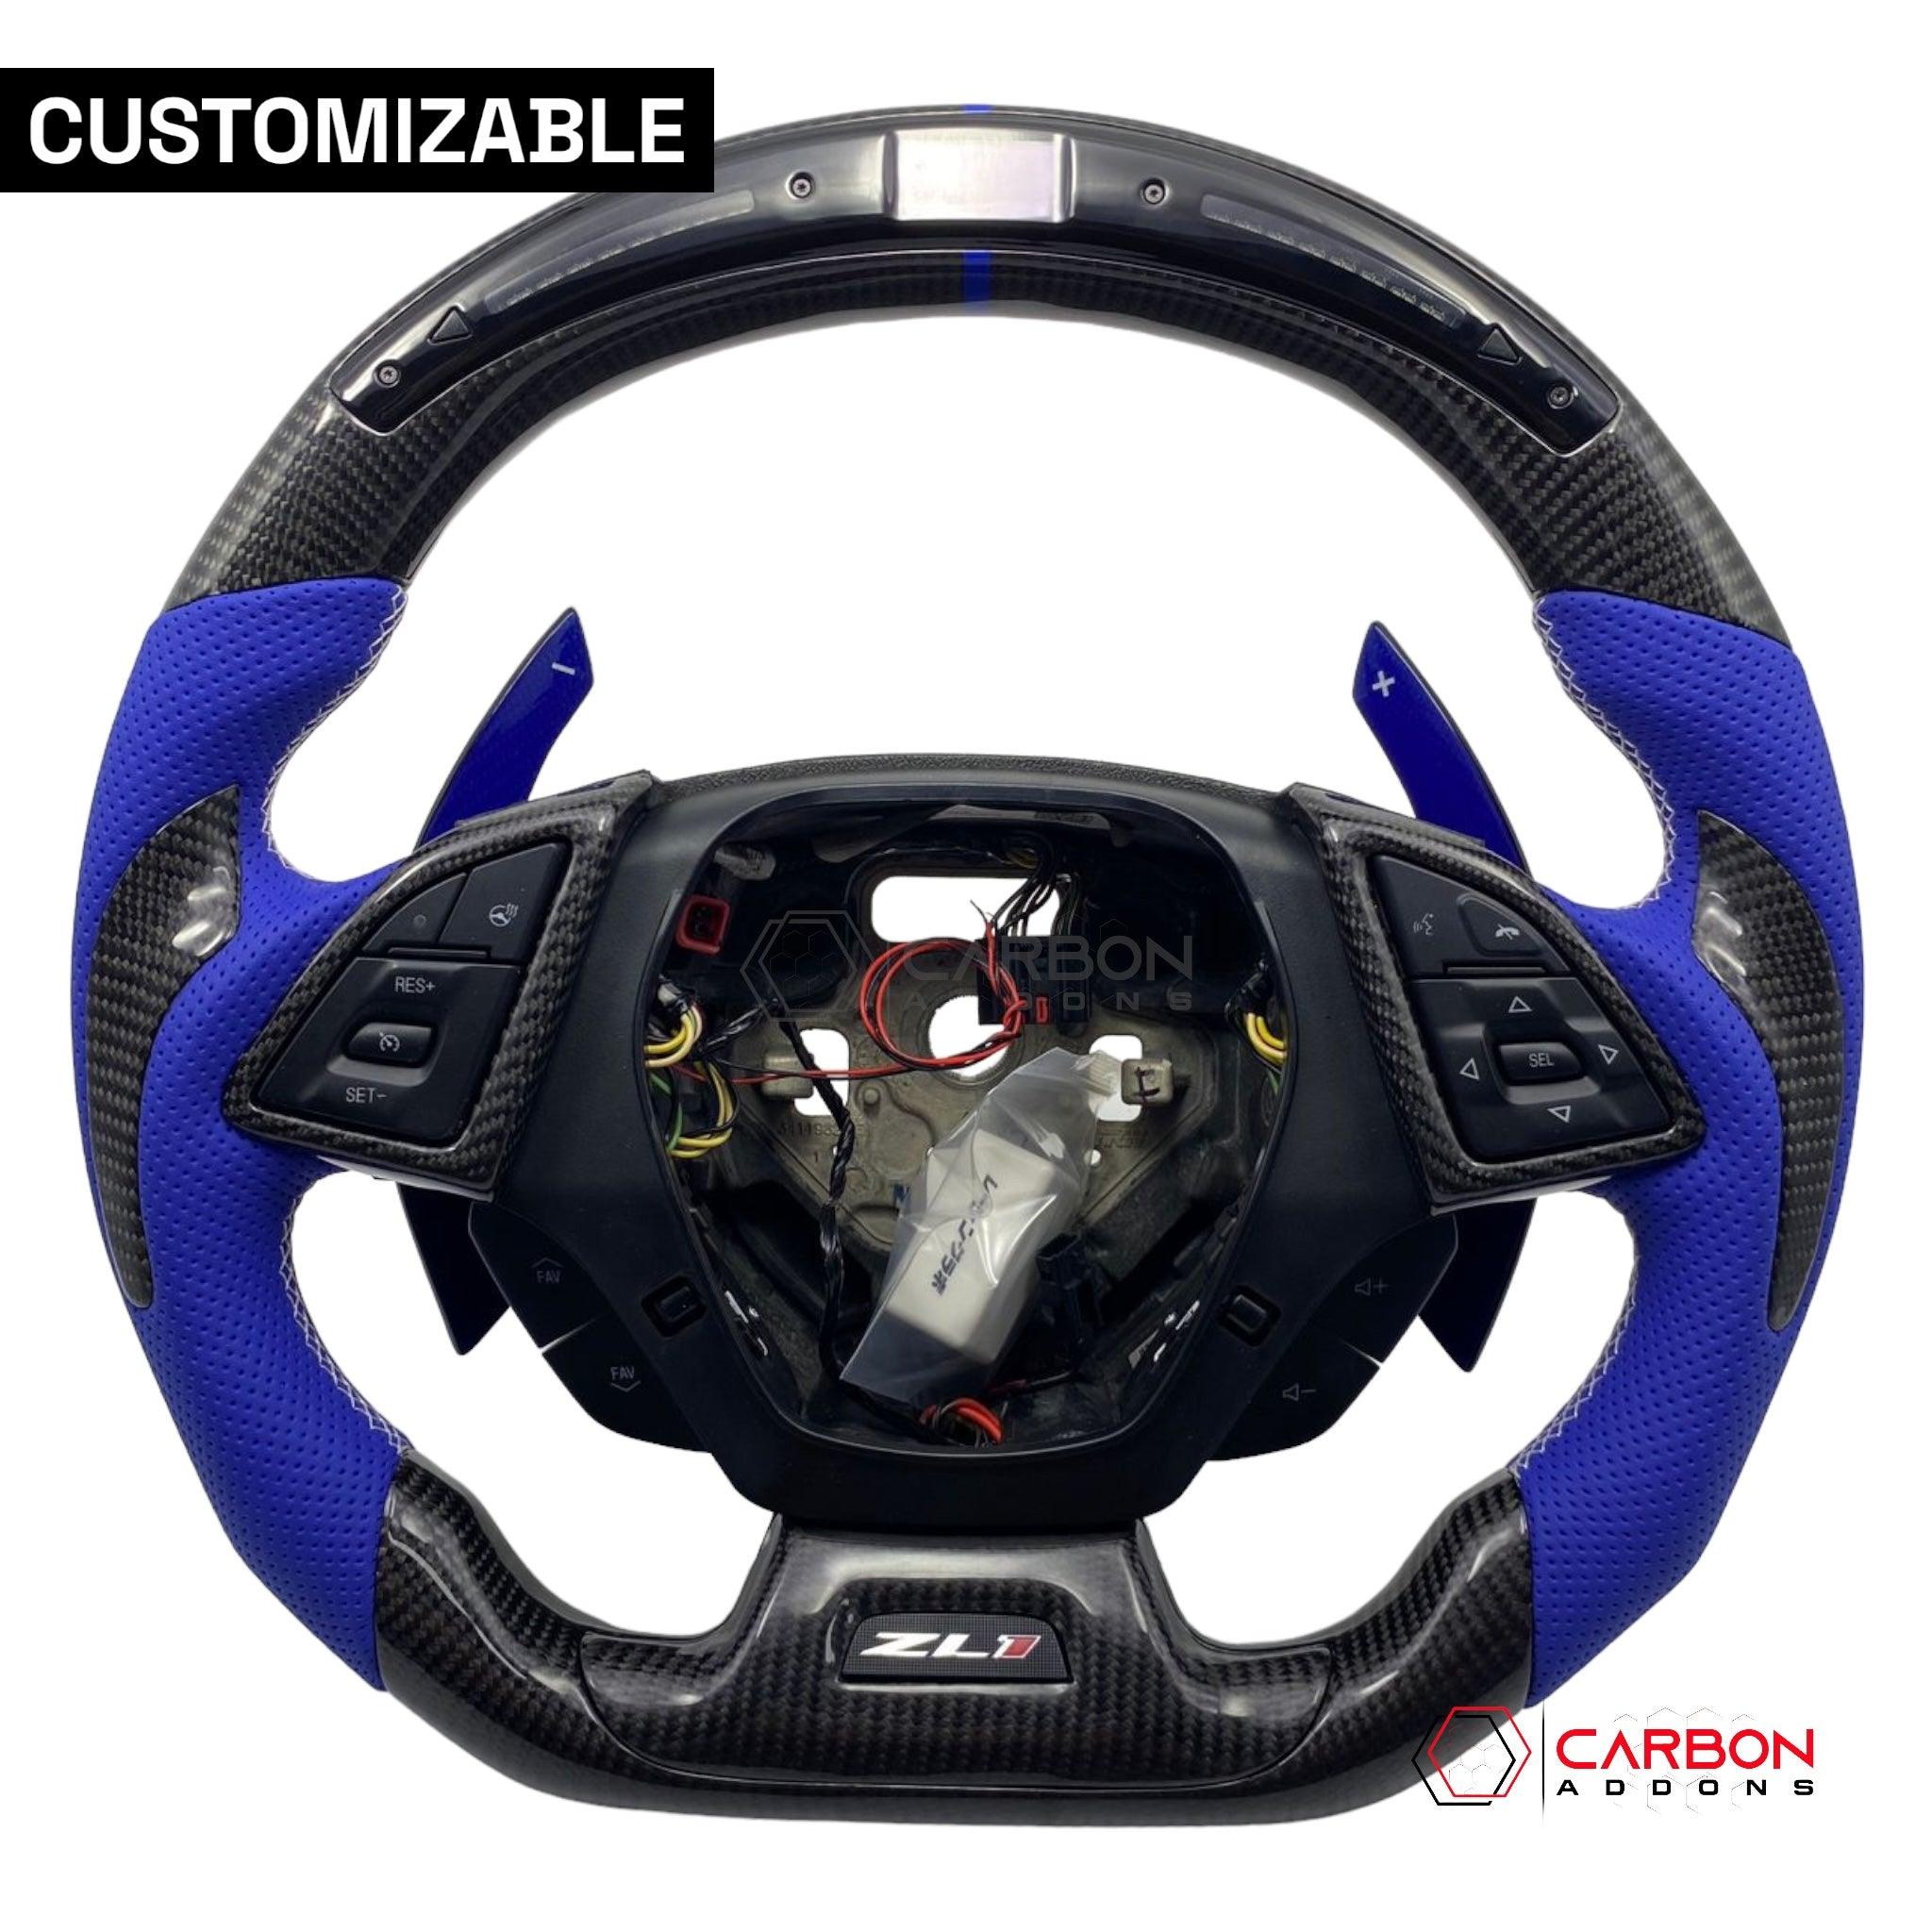 [Complete/Heated] Custom Carbon Fiber Steering Wheel For 2016-2024 Chevy Camaro - carbonaddons Carbon Fiber Parts, Accessories, Upgrades, Mods